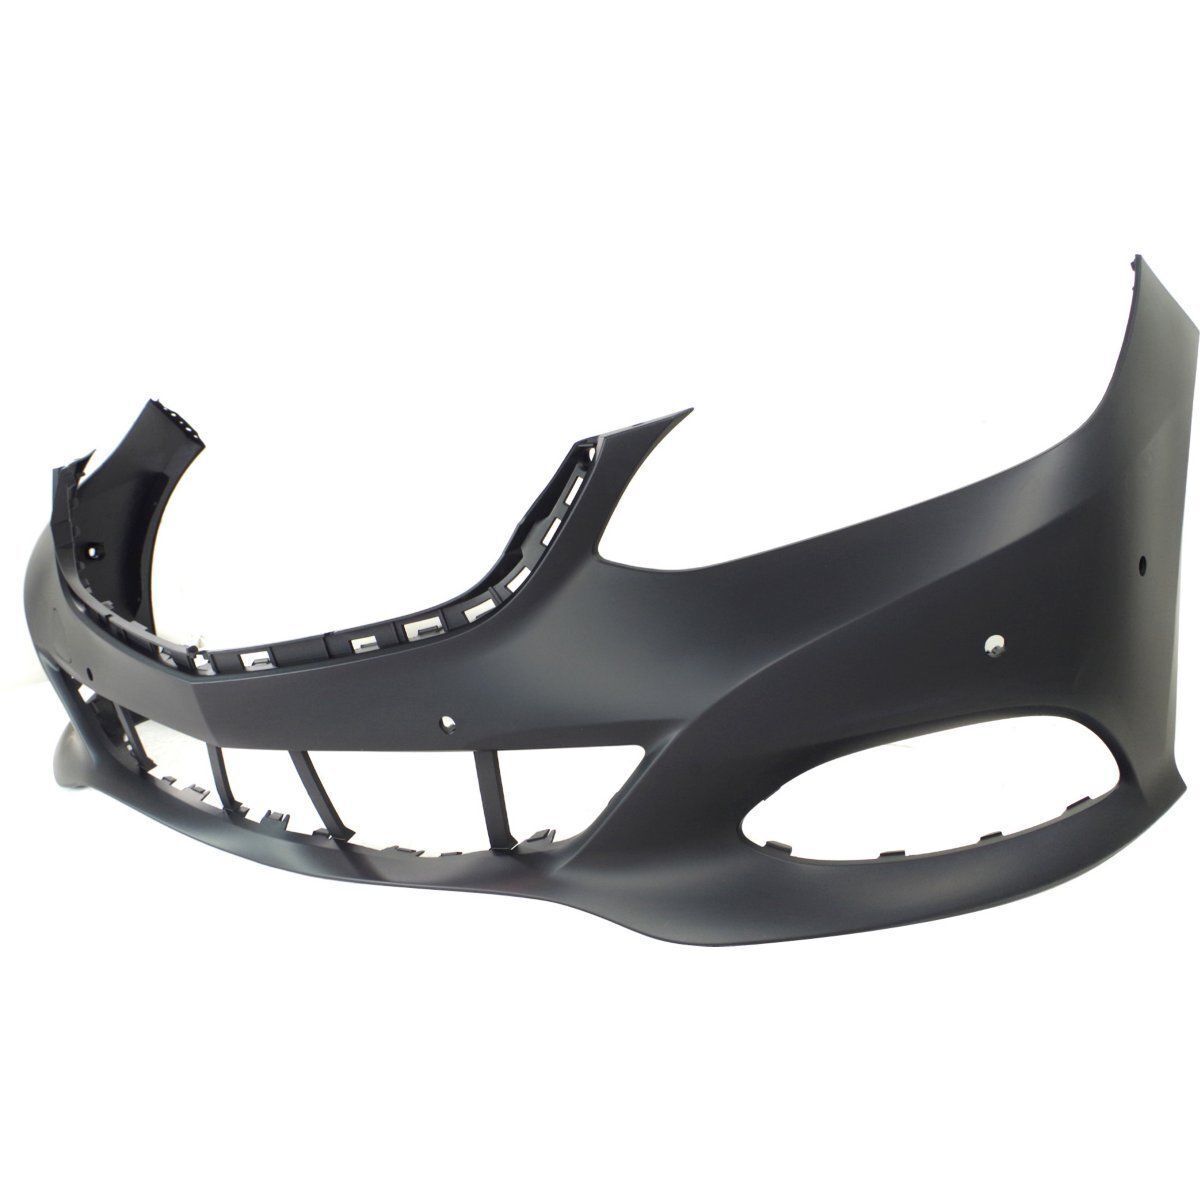 2014-2016 MERCEDES-BENZ E-CLASS; Front Bumper Cover; W212 w/o AMG w/Parktroic w/o Insert Painted to Match